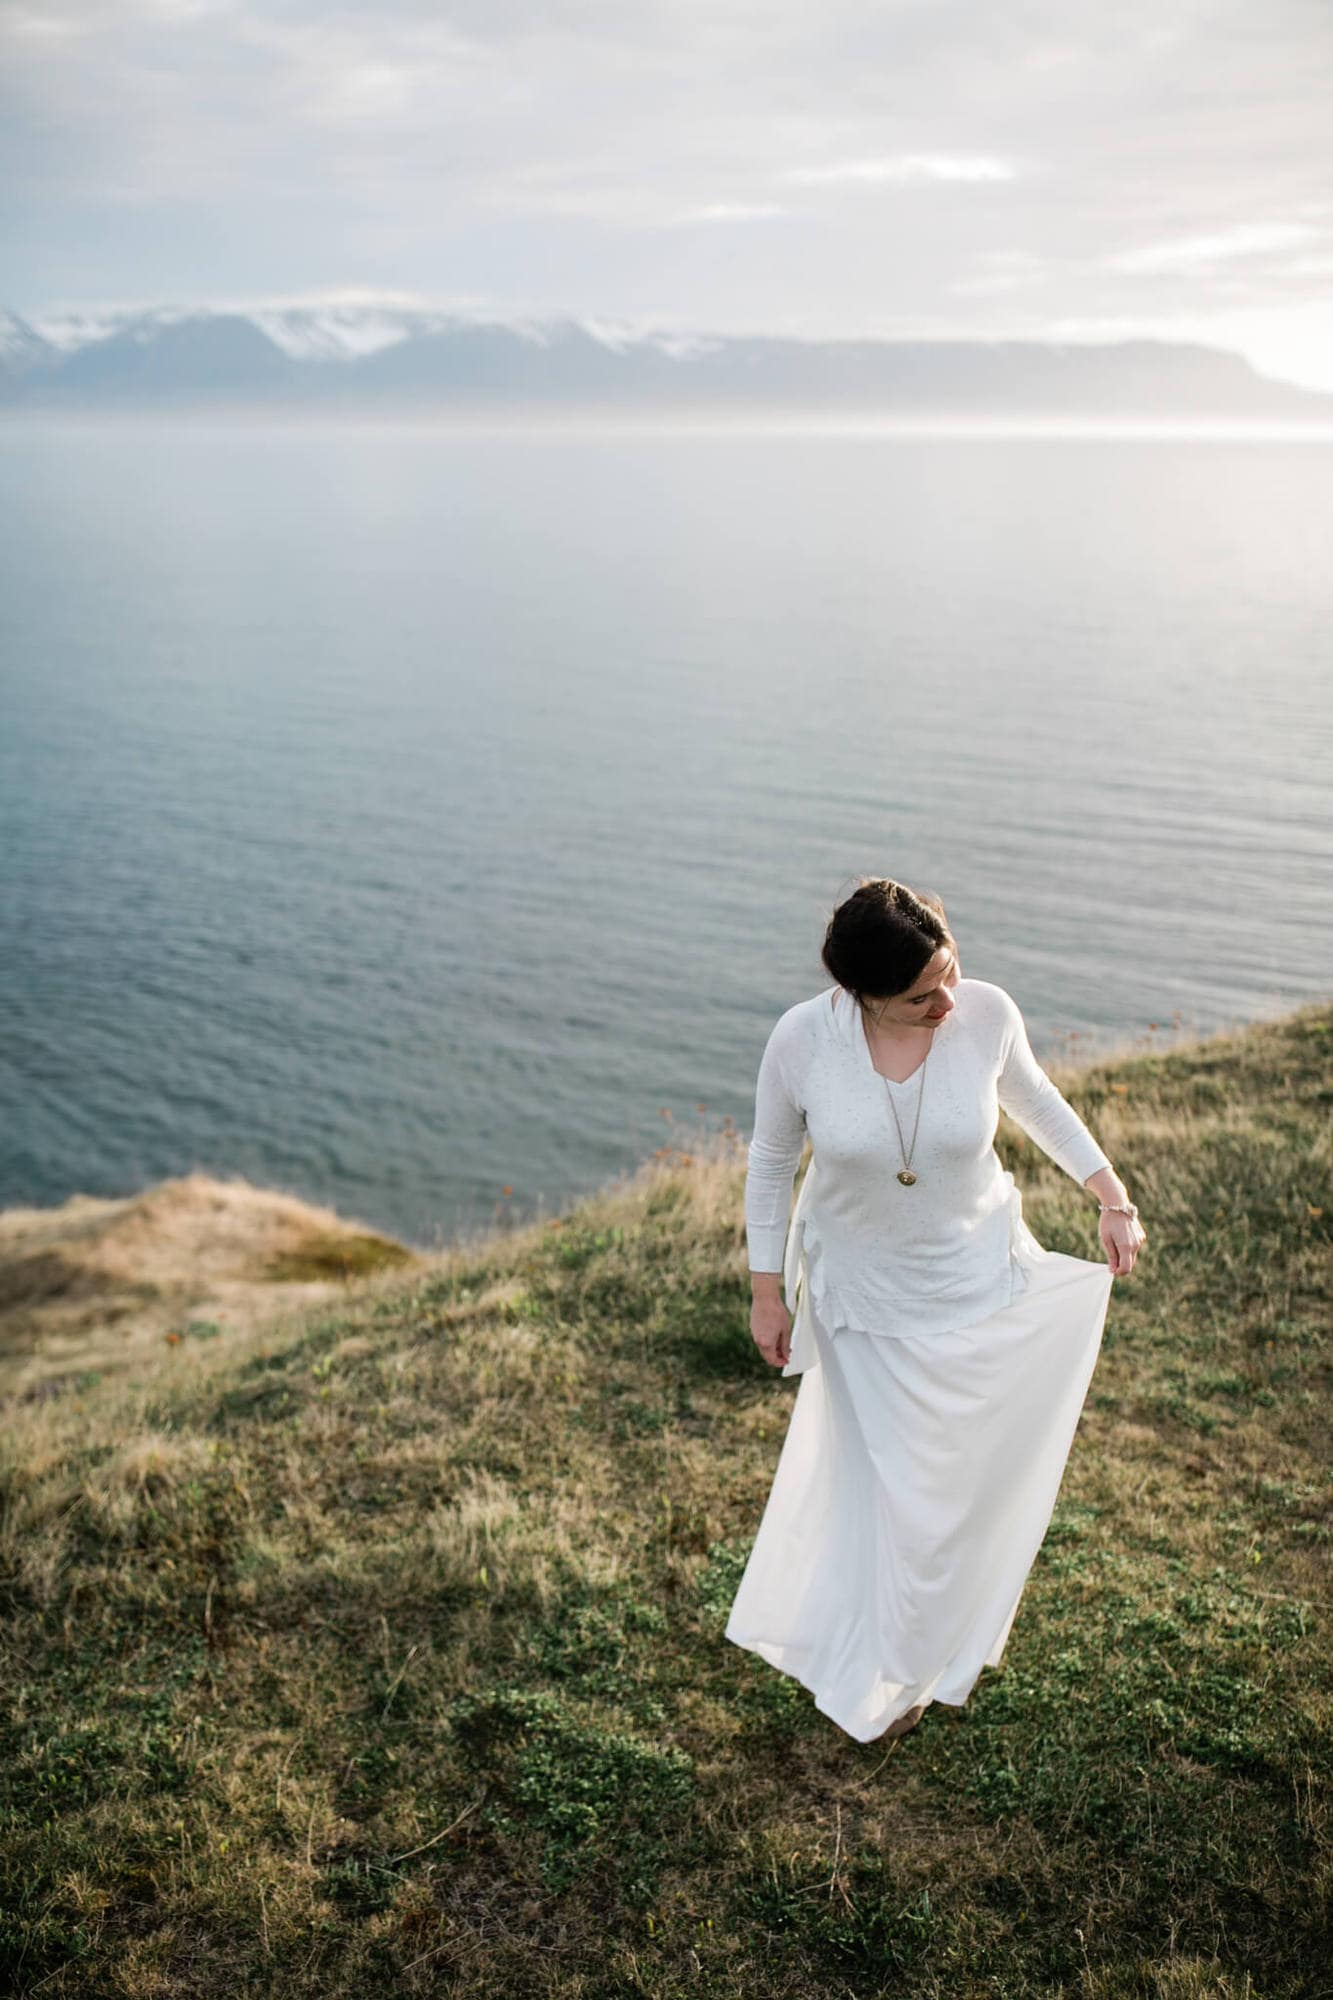 A bride plays with her skirt on a sea cliff in Iceland.